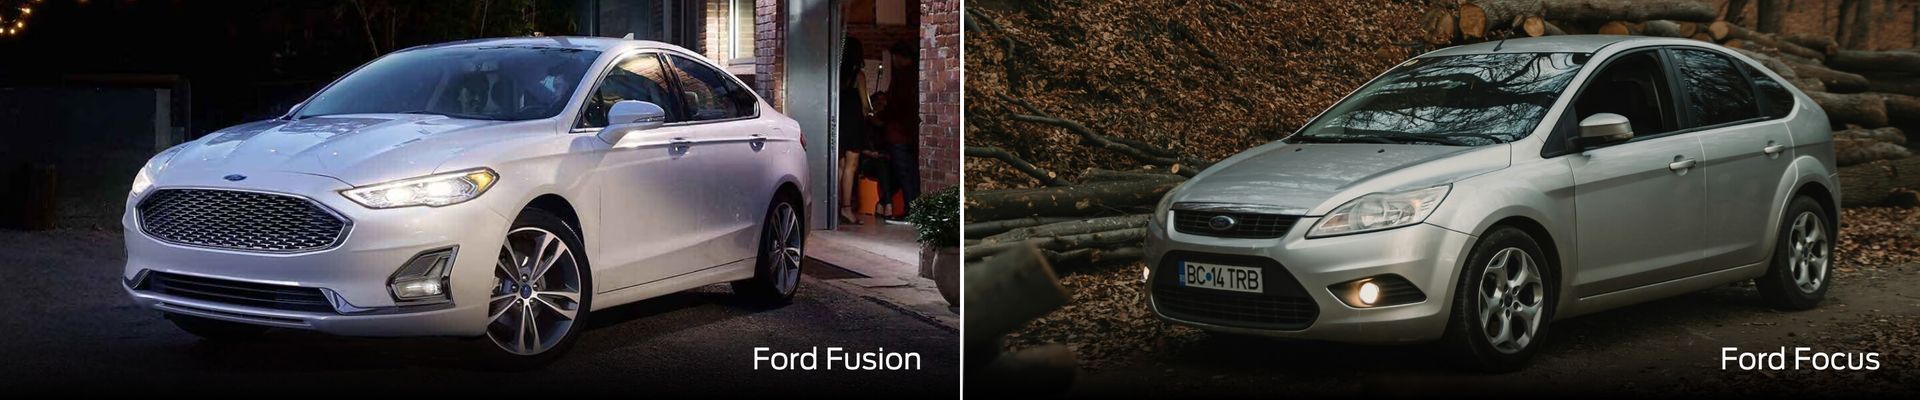 Ford Fusion Vs. Ford Focus: Compare Performance, Reliability & Price